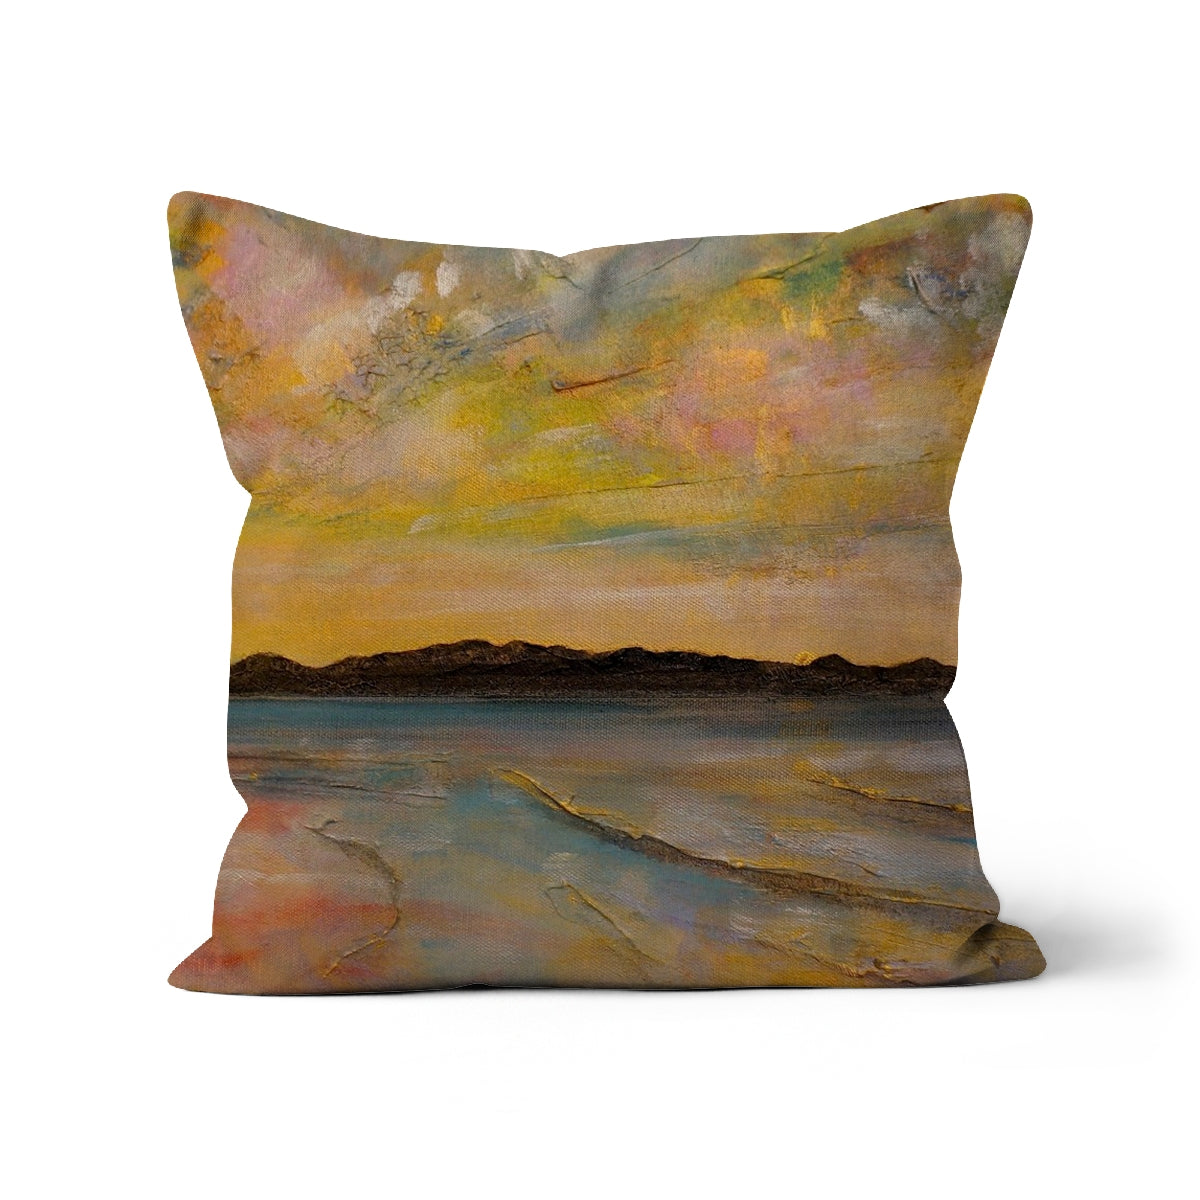 Vallay Island North Uist Art Gifts Cushion-Cushions-Hebridean Islands Art Gallery-Linen-24"x24"-Paintings, Prints, Homeware, Art Gifts From Scotland By Scottish Artist Kevin Hunter